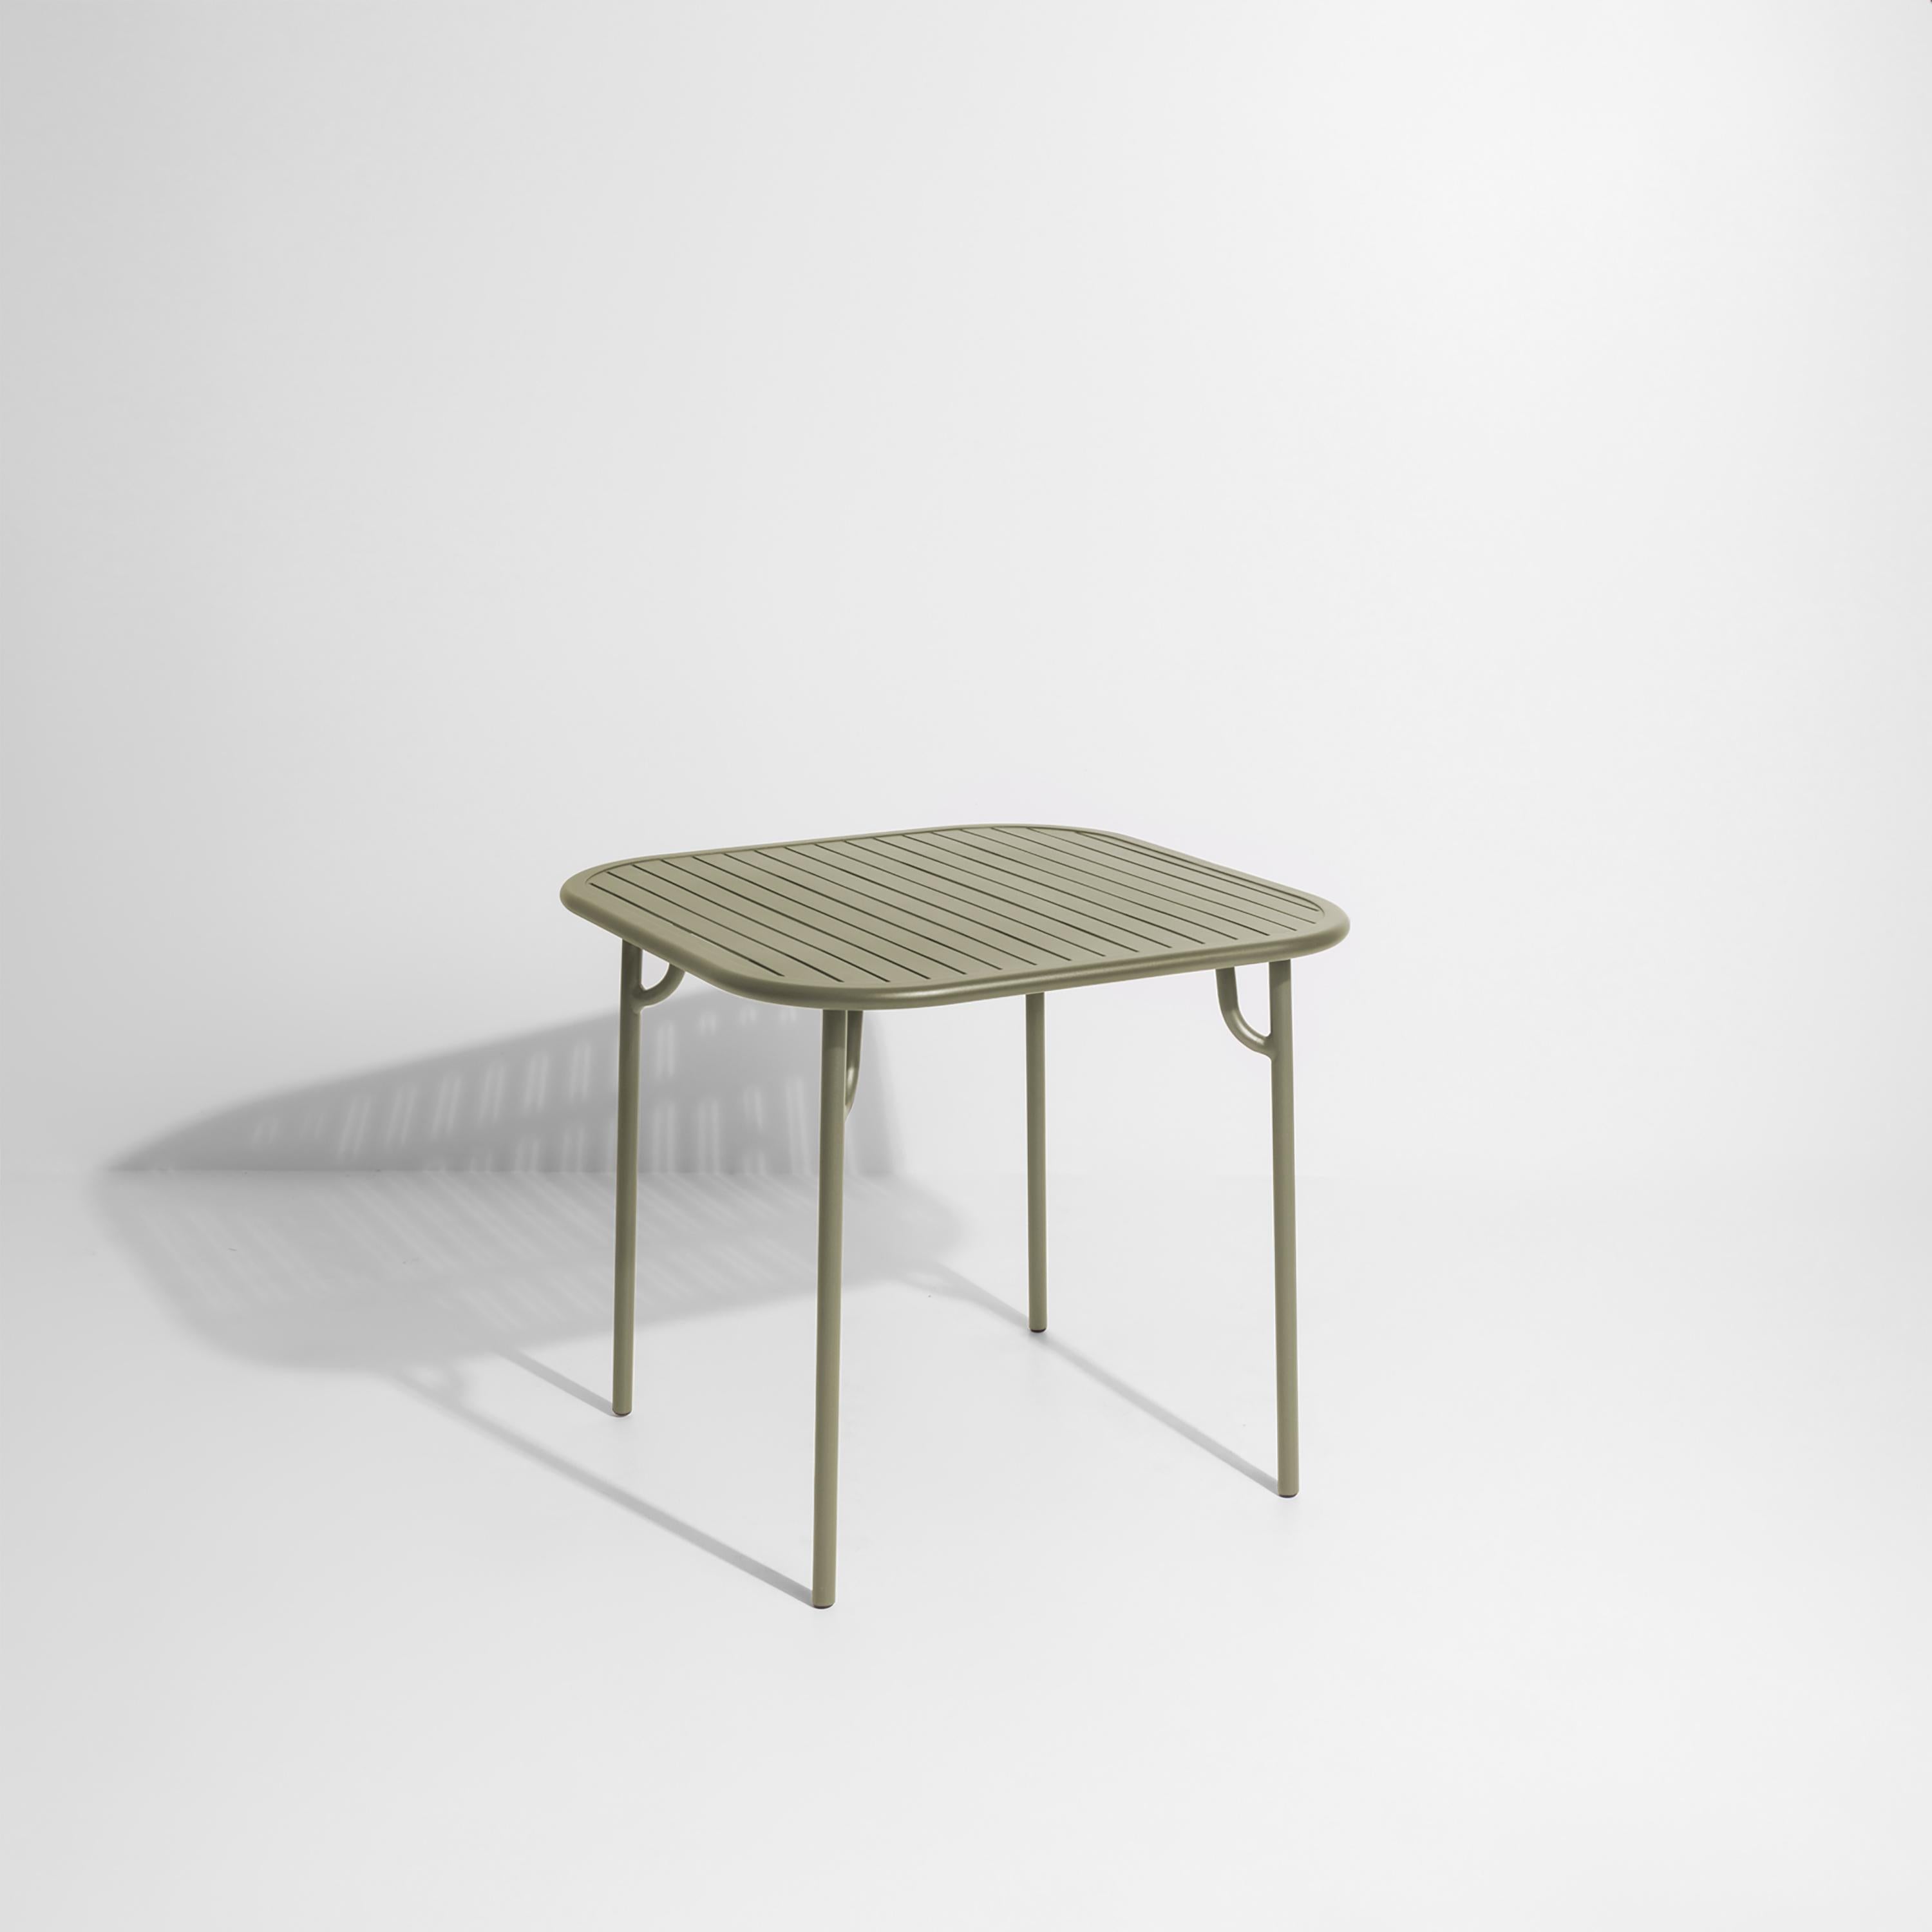 Petite Friture Week-End Square Dining Table in Jade Green Aluminium with Slats by Studio BrichetZiegler, 2017

The week-end collection is a full range of outdoor furniture, in aluminium grained epoxy paint, matt finish, that includes 18 functions